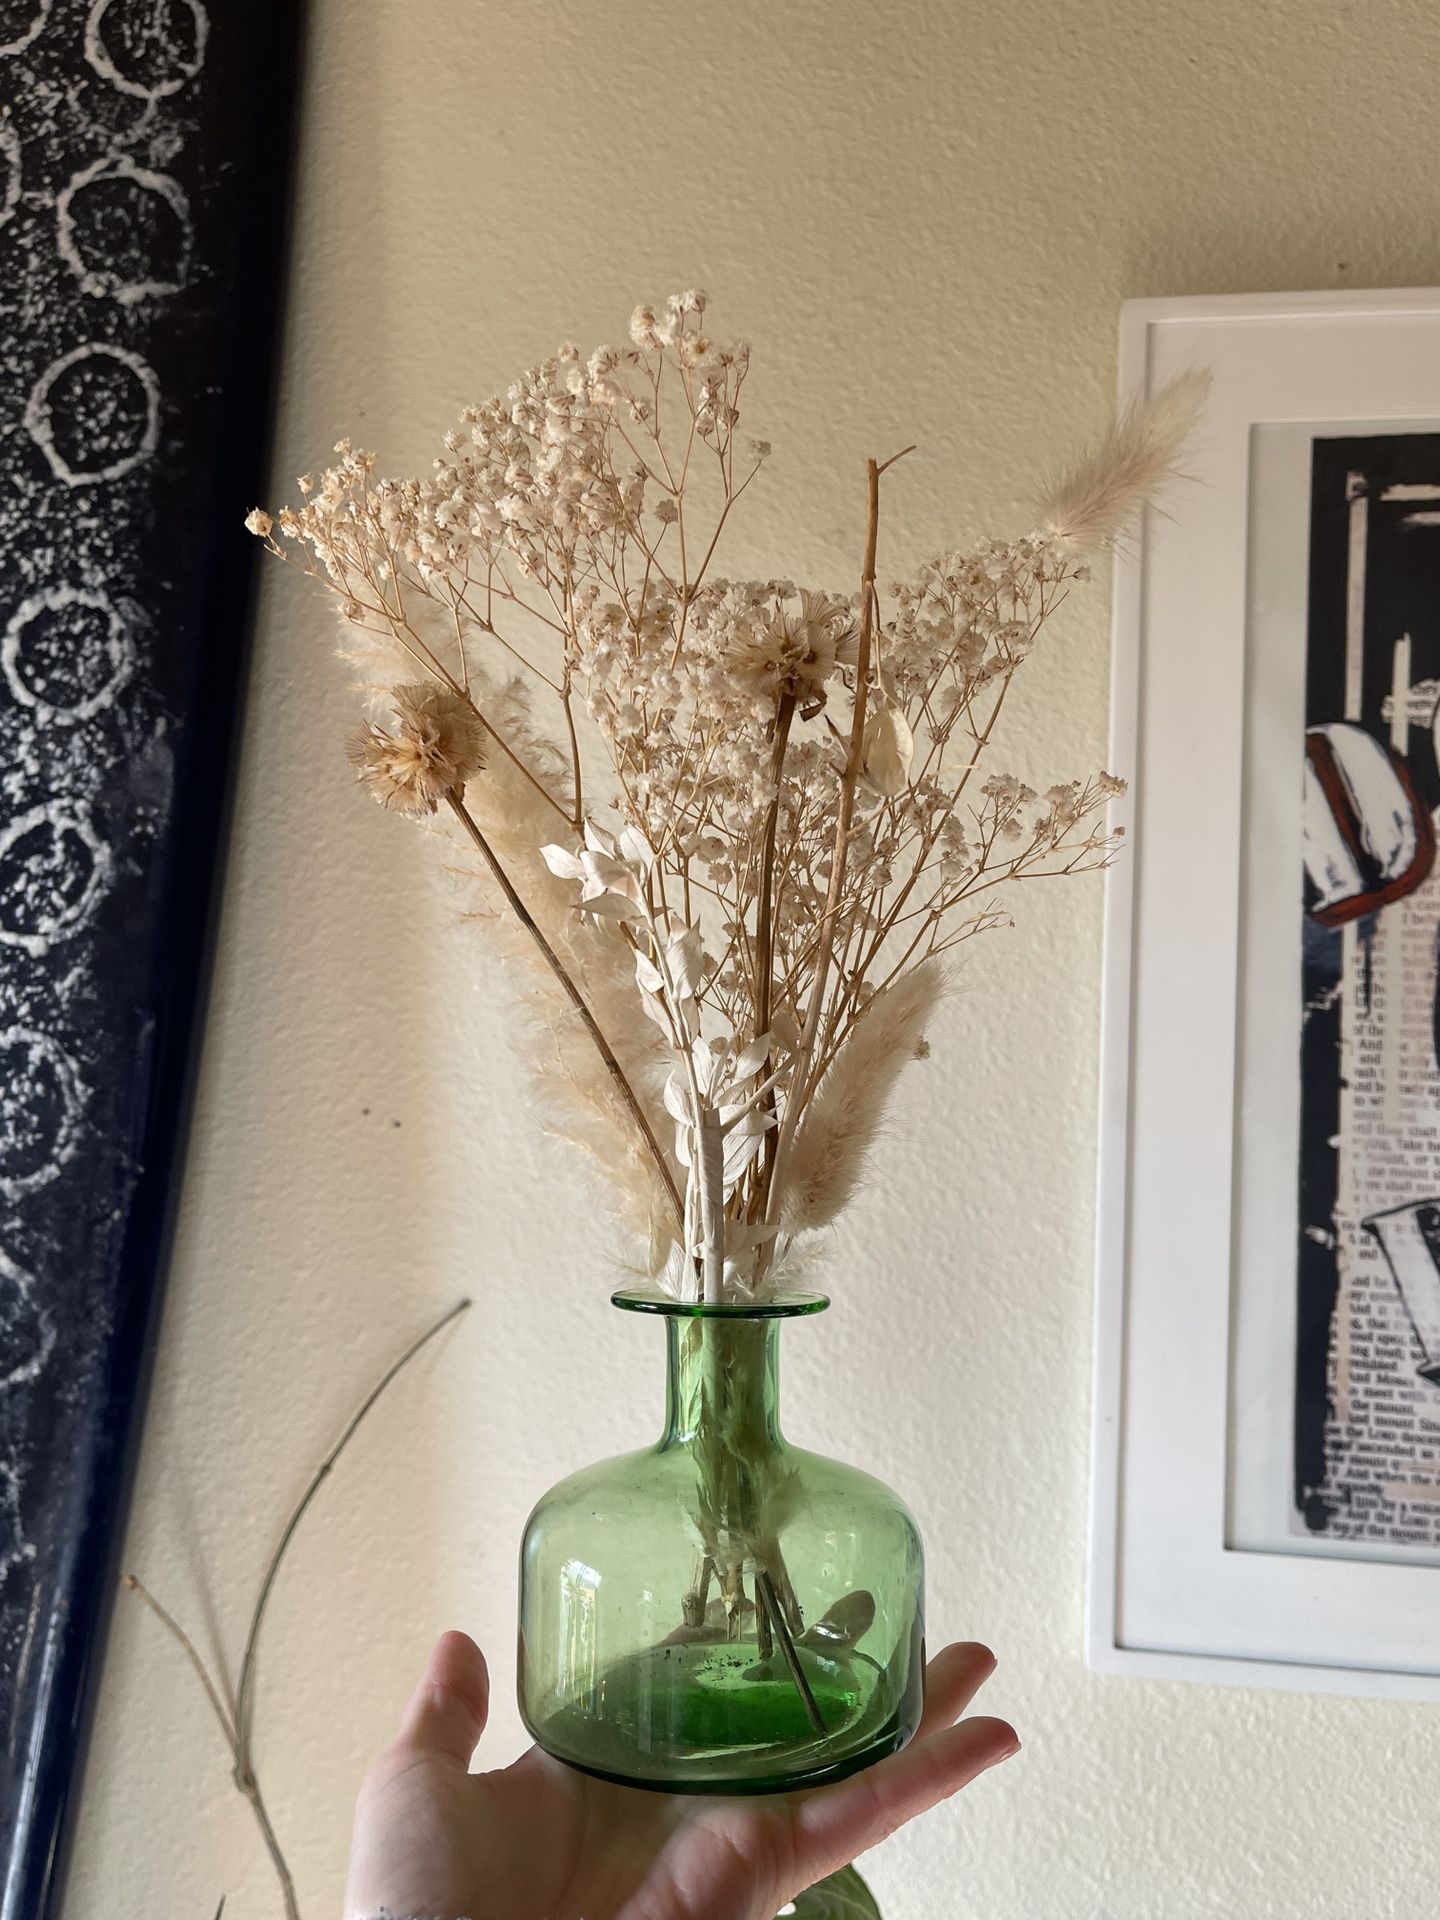 Anthropologie Green Glass Bud Vase And Some Dried Flowers 